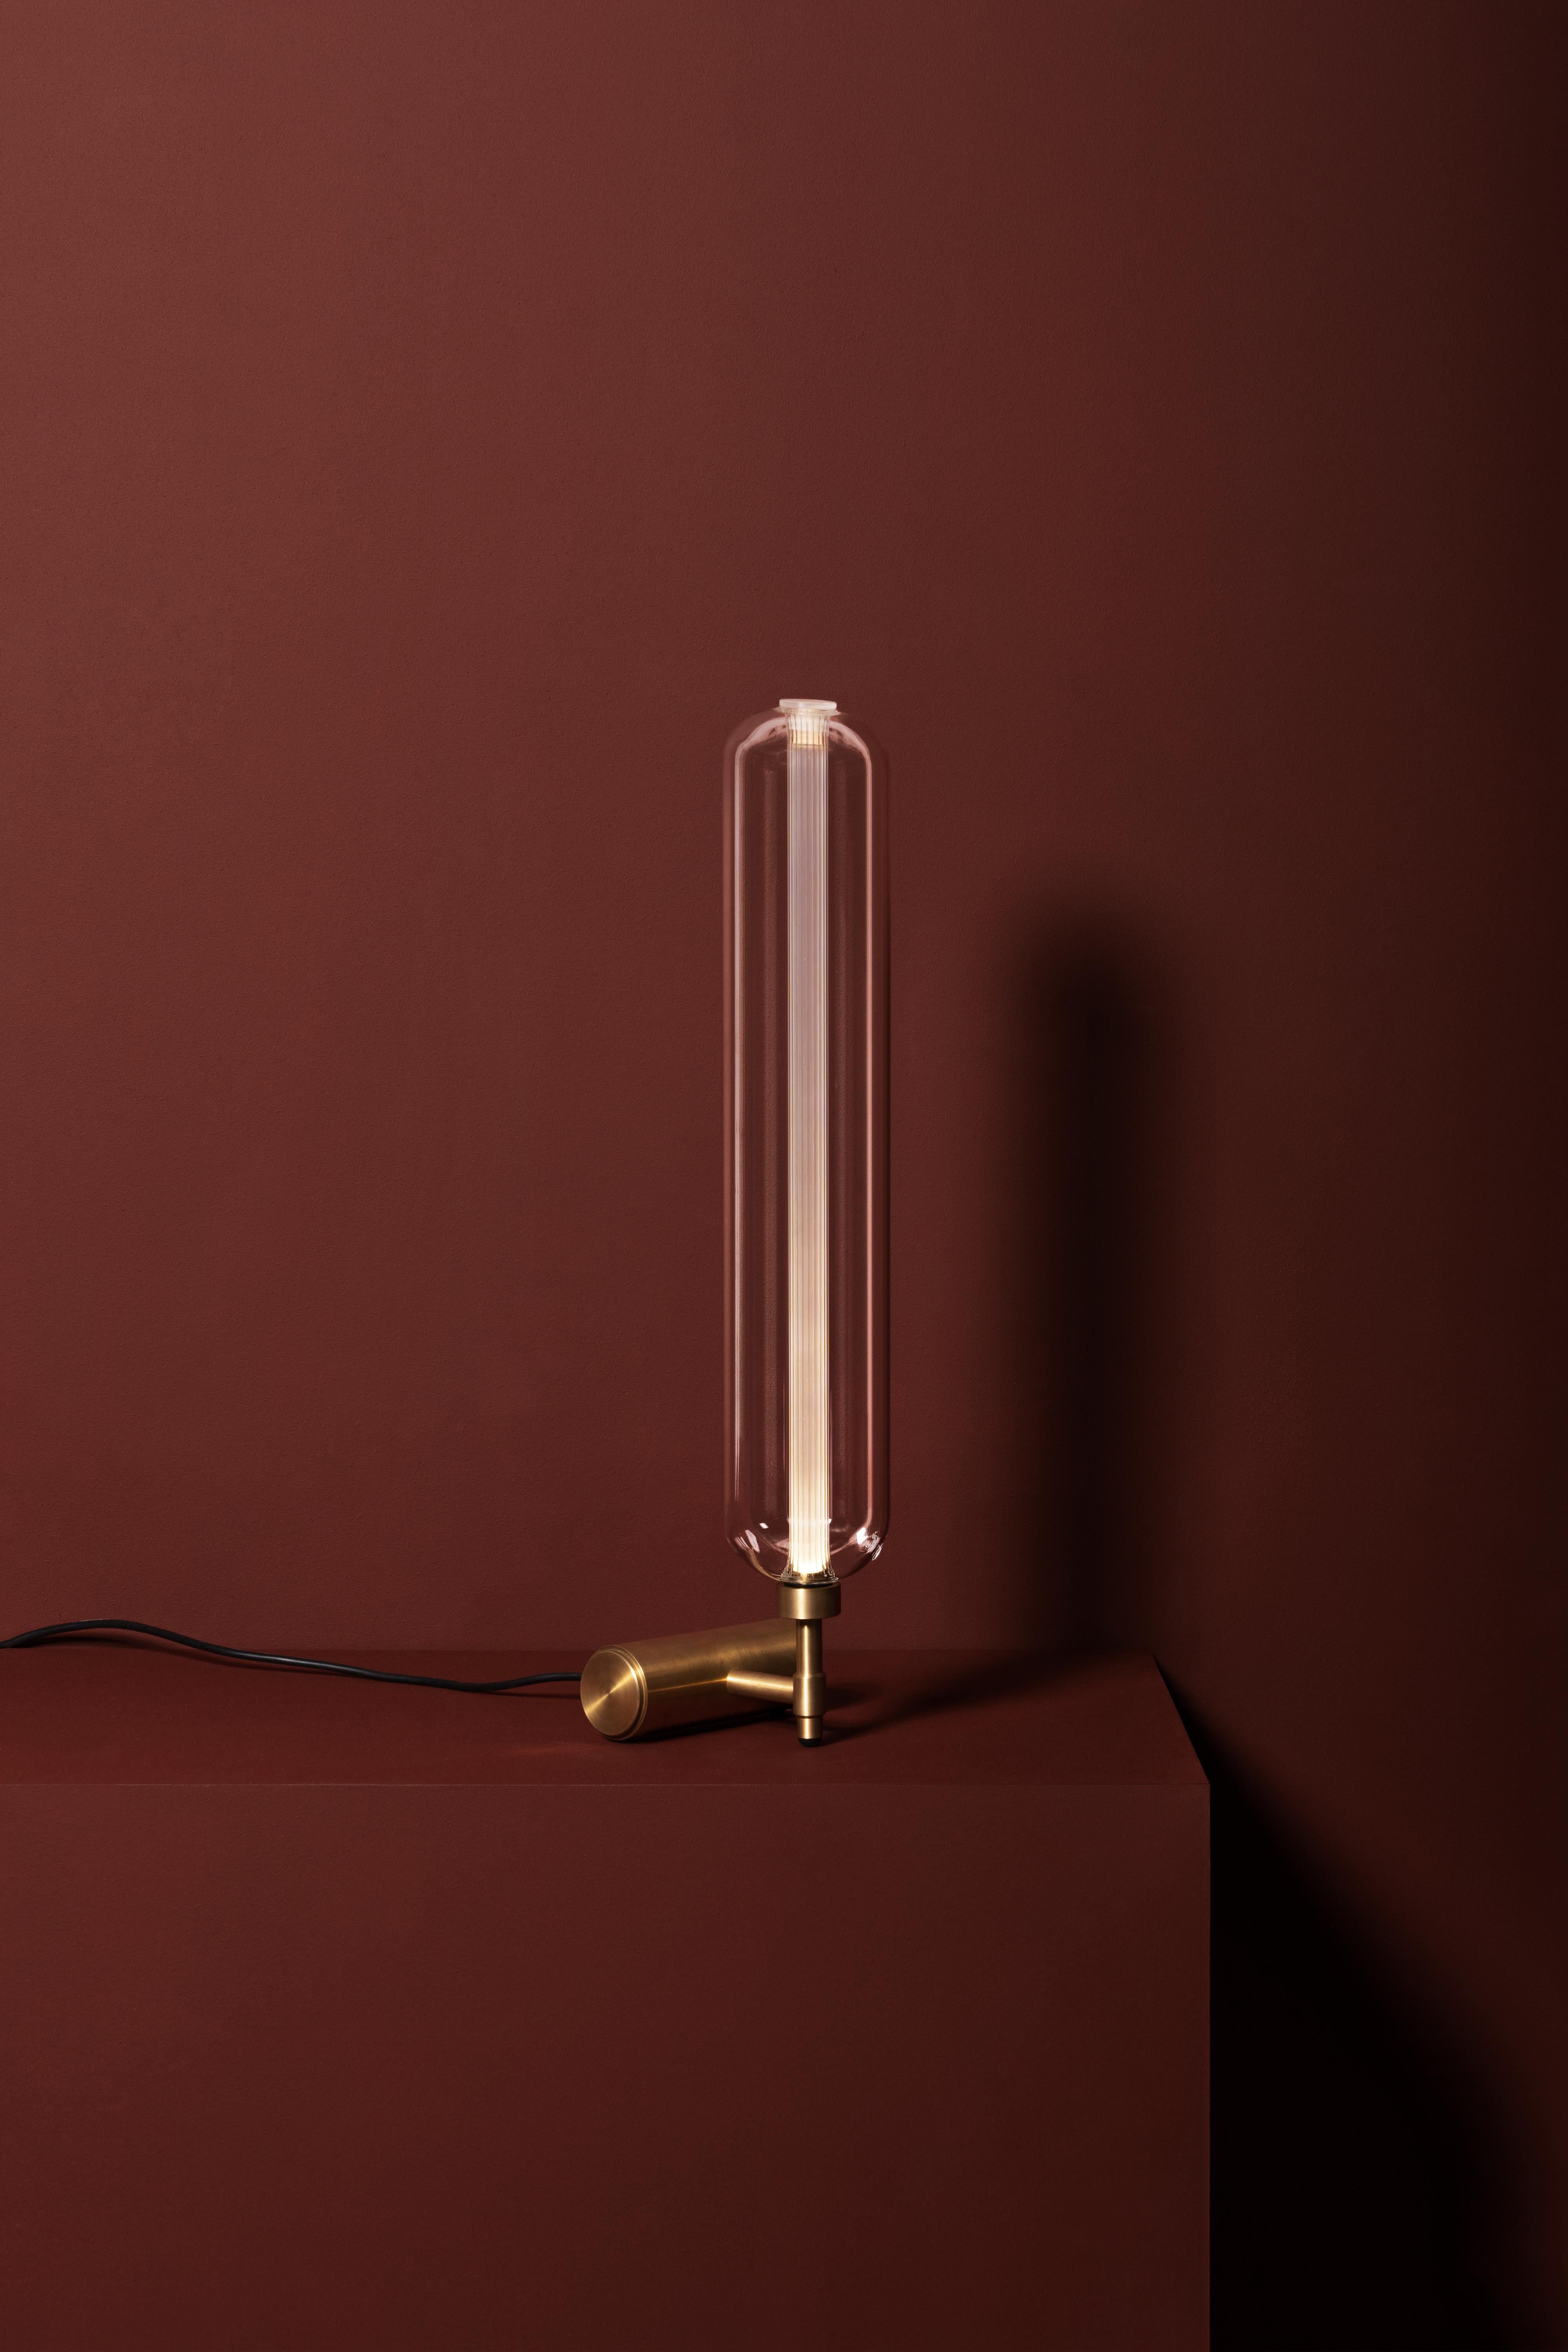 Designed by Pietro Russo, the Scintilla table lamp is nothing short of a solid, modern, pure and versatile lighting sculpture. The lamp is named for its sparkle effect when lit. Formed from two mouth-blown glass cylinders, the borosilicate inner